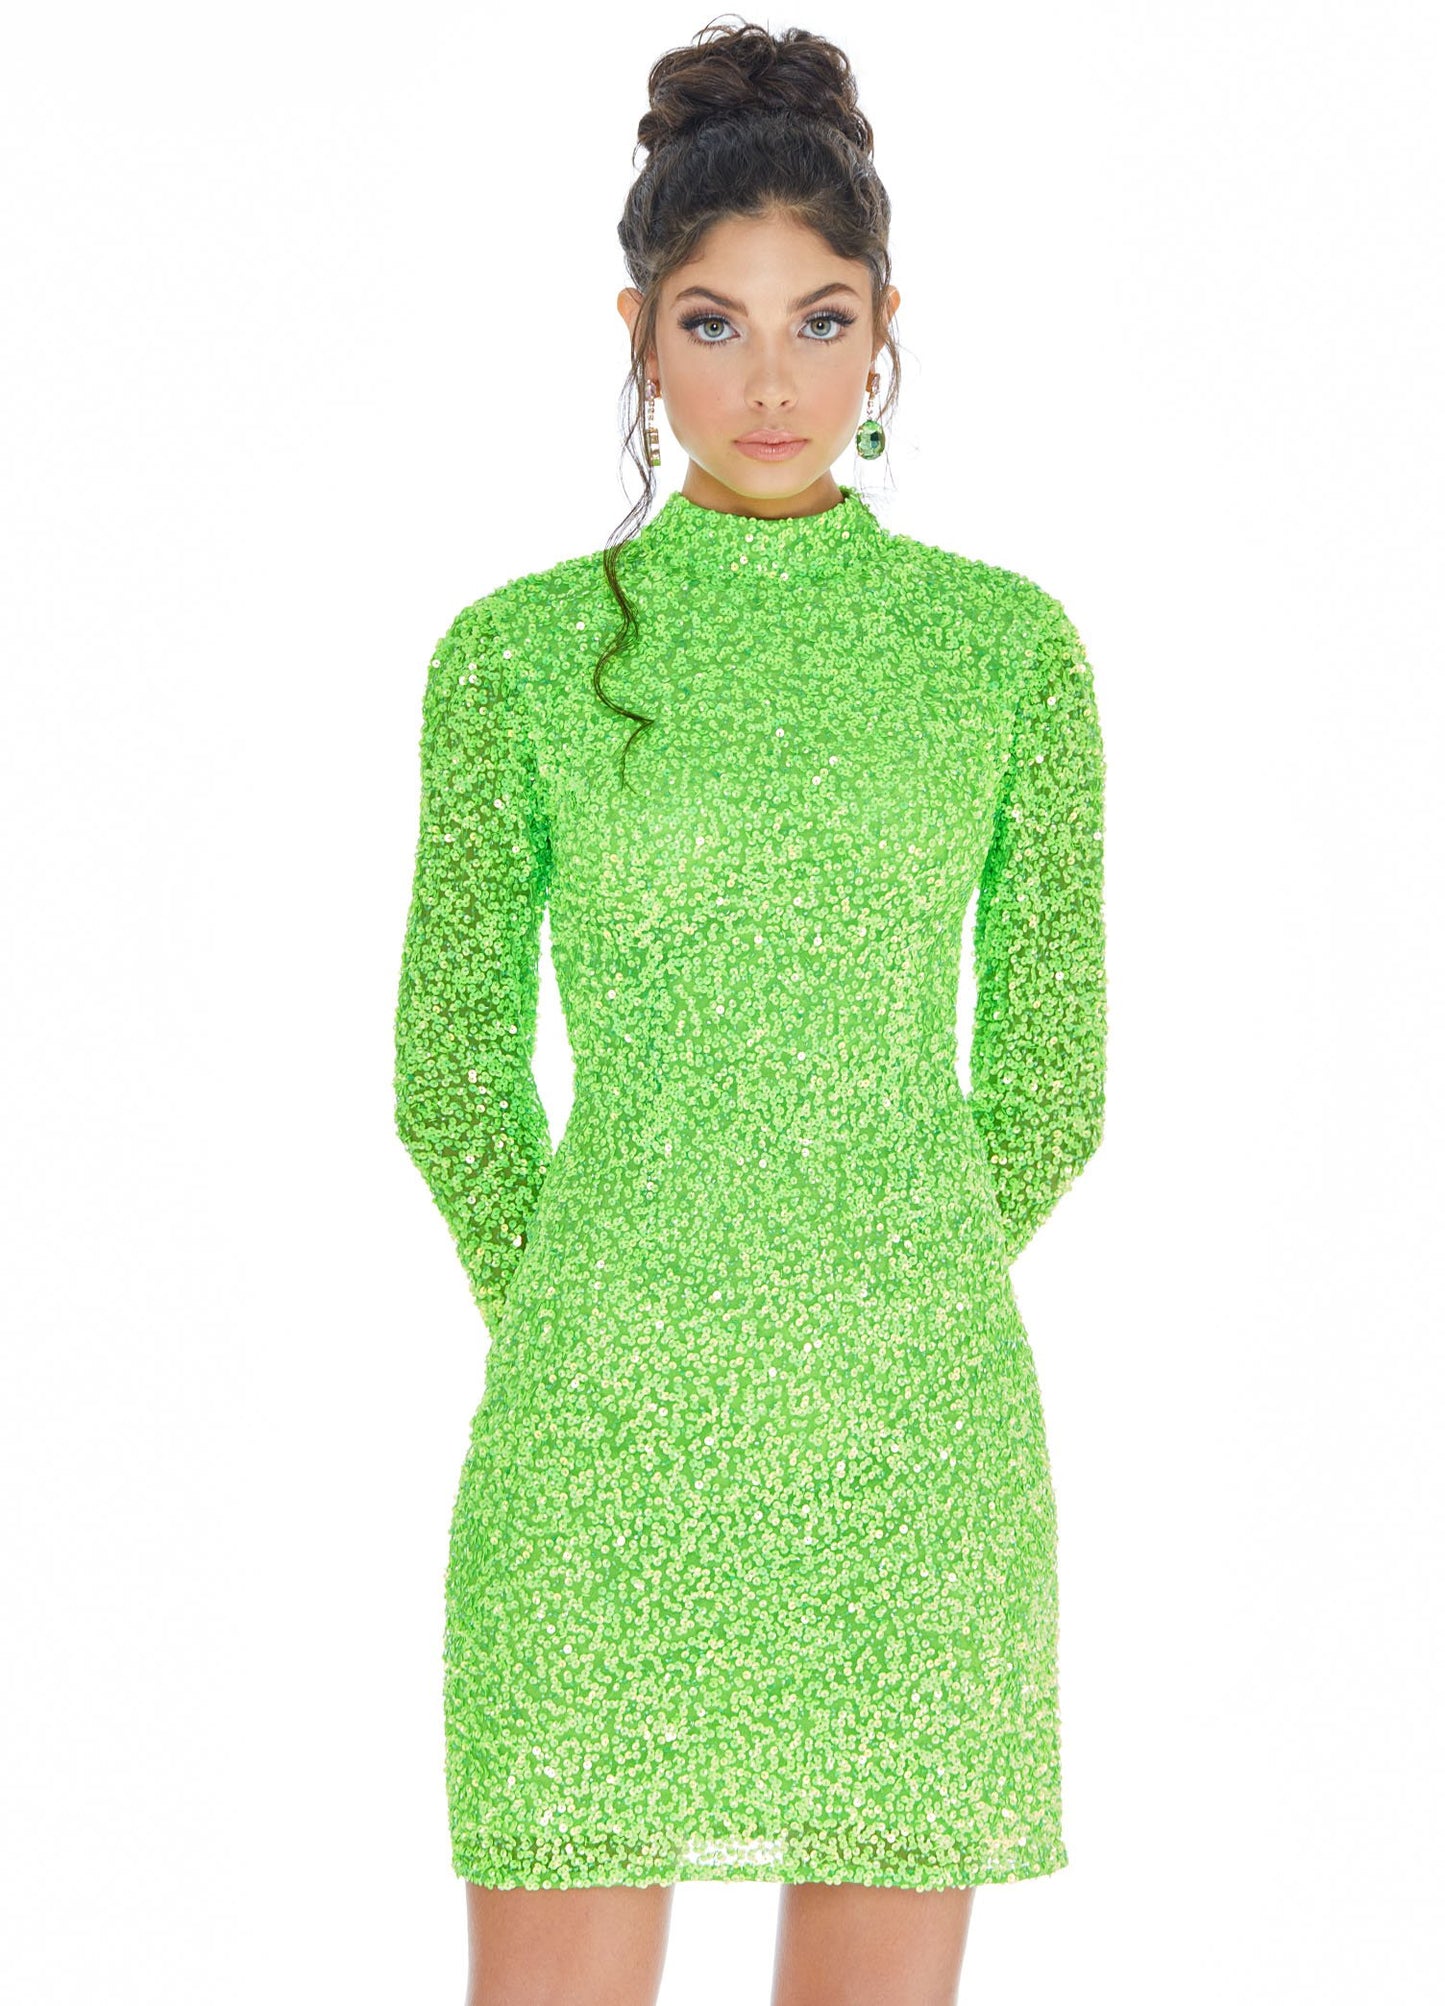 Ashley Lauren 4252 long sleeve sequin beaded short cocktail dress with high neckline and circle cutout back.  Available colors:  Rose Gold, Blue, Nebula Green, Fuchsia, Neon Green, Red  Available sizes:  0-16  Dance the night away in this fully beaded long sleeve cocktail dress. The modern high neckline perfectly contrasts the sexy open back.  High Neckline Open Back Fitted Fully Beaded  